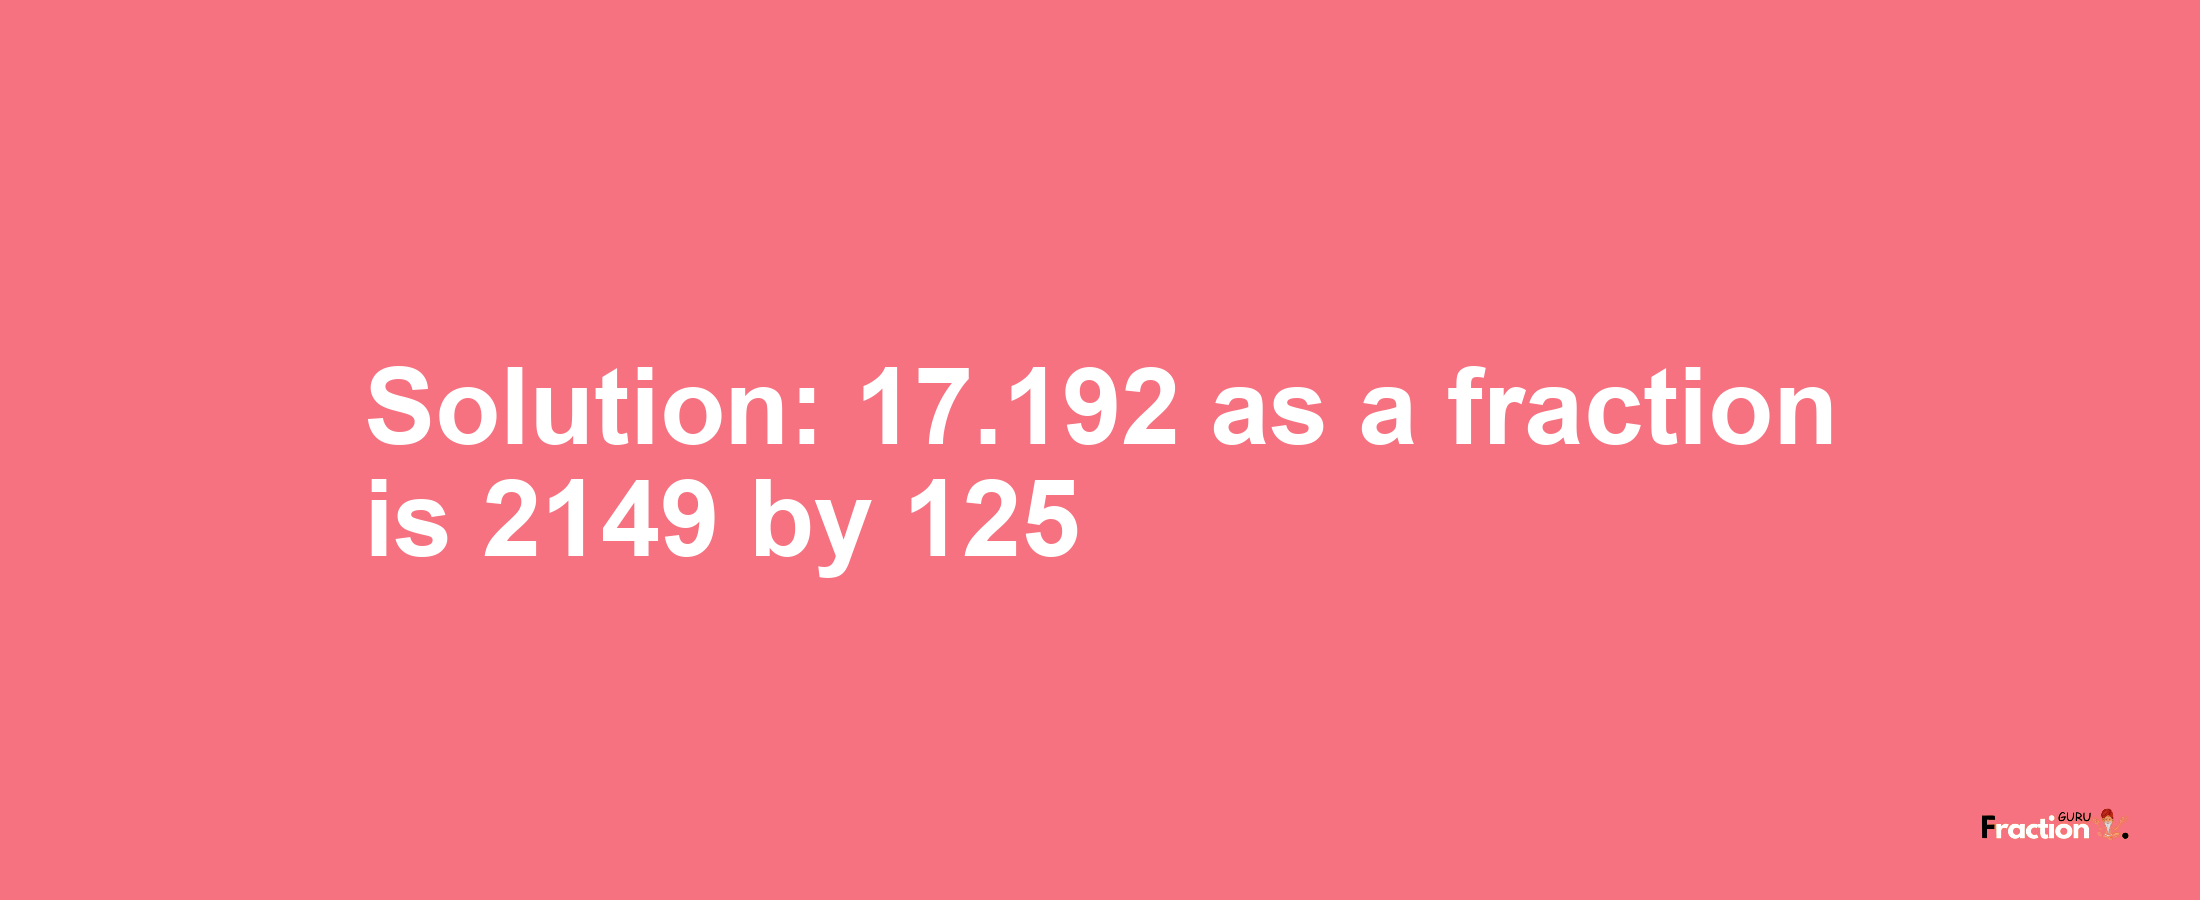 Solution:17.192 as a fraction is 2149/125